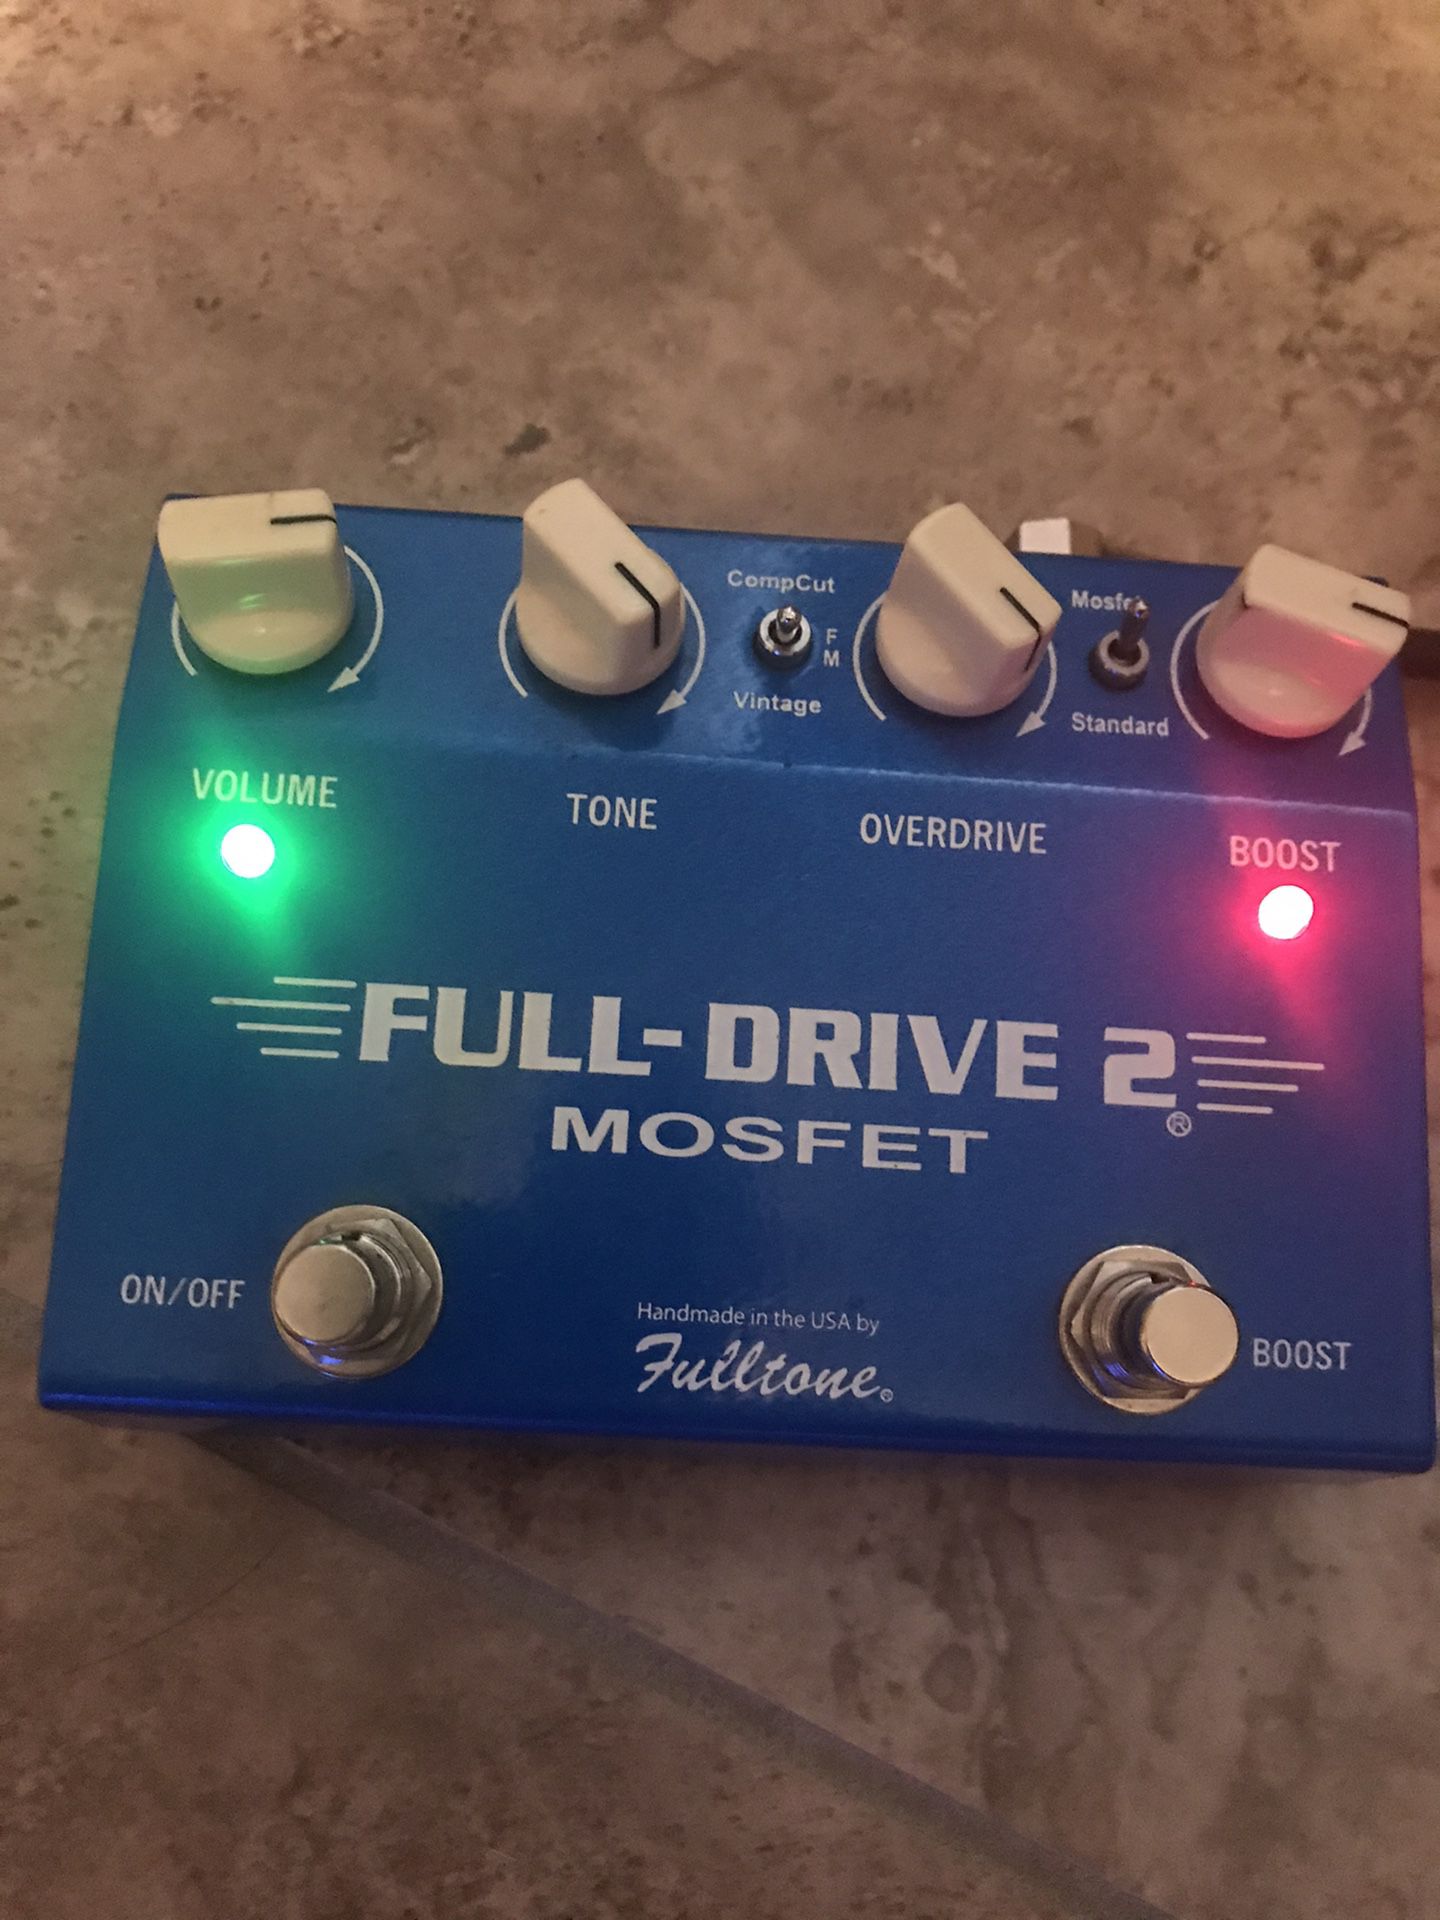 Mosfet Full-drive 2 guitar pedal - overdrive